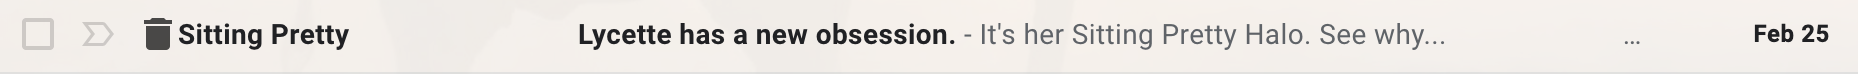 Subject line is vague and not specific